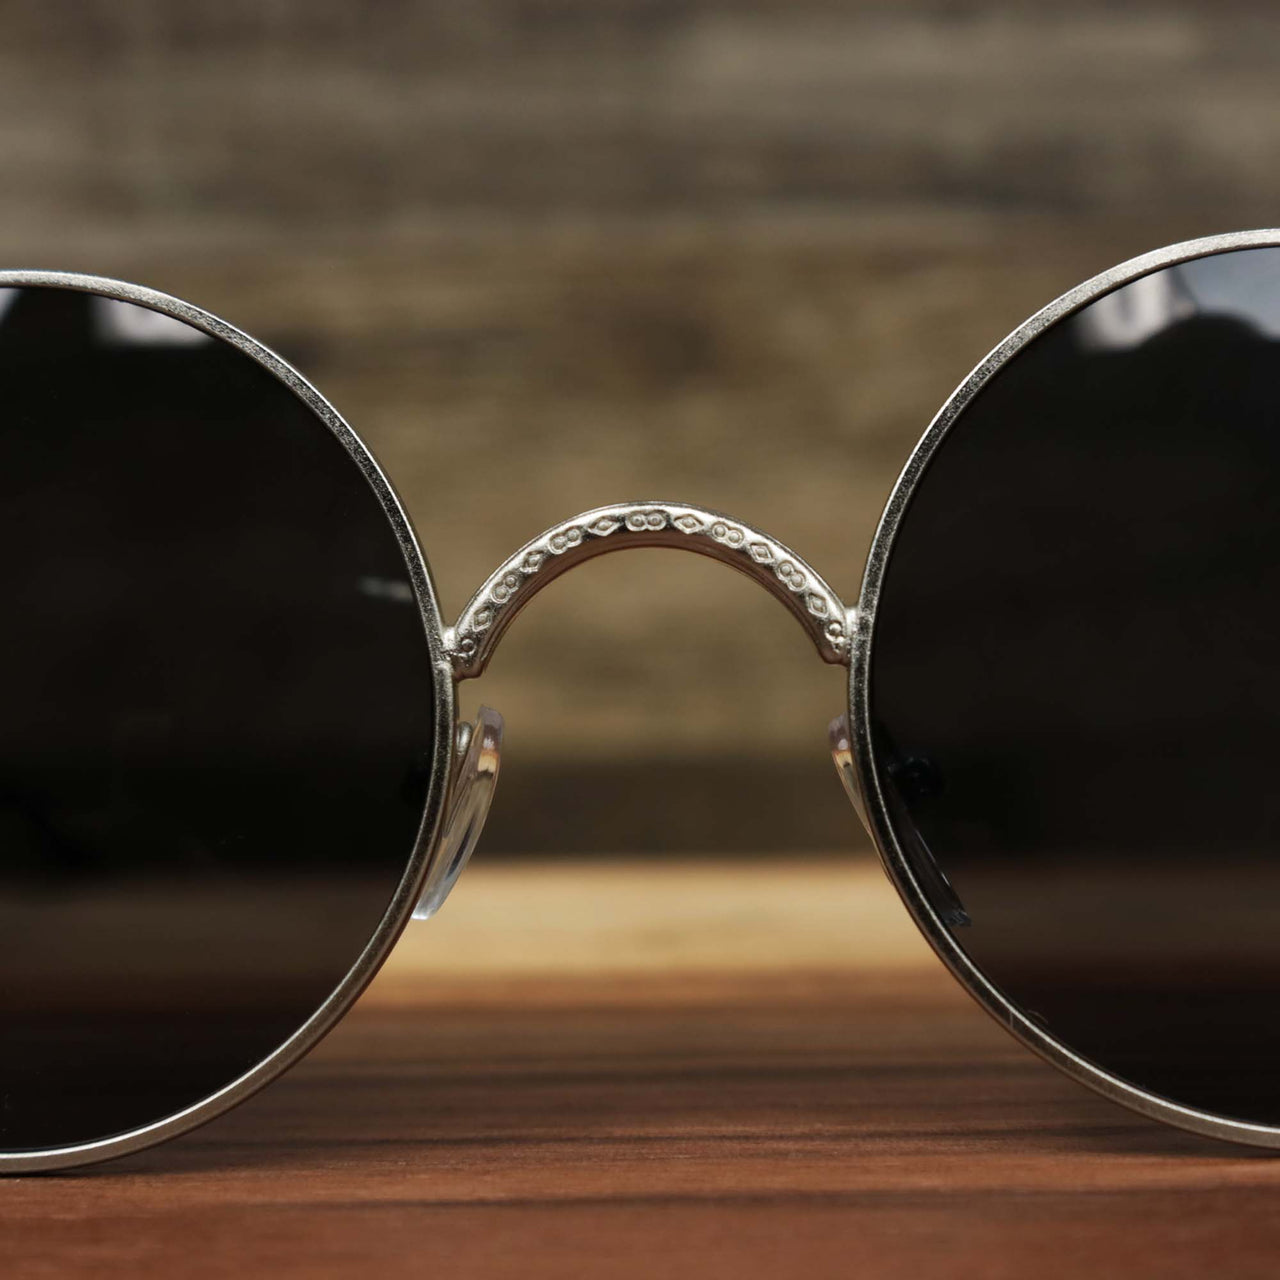 The bridge of the Round Frame Arched Bridge Black Lens Sunglasses with Silver Frame